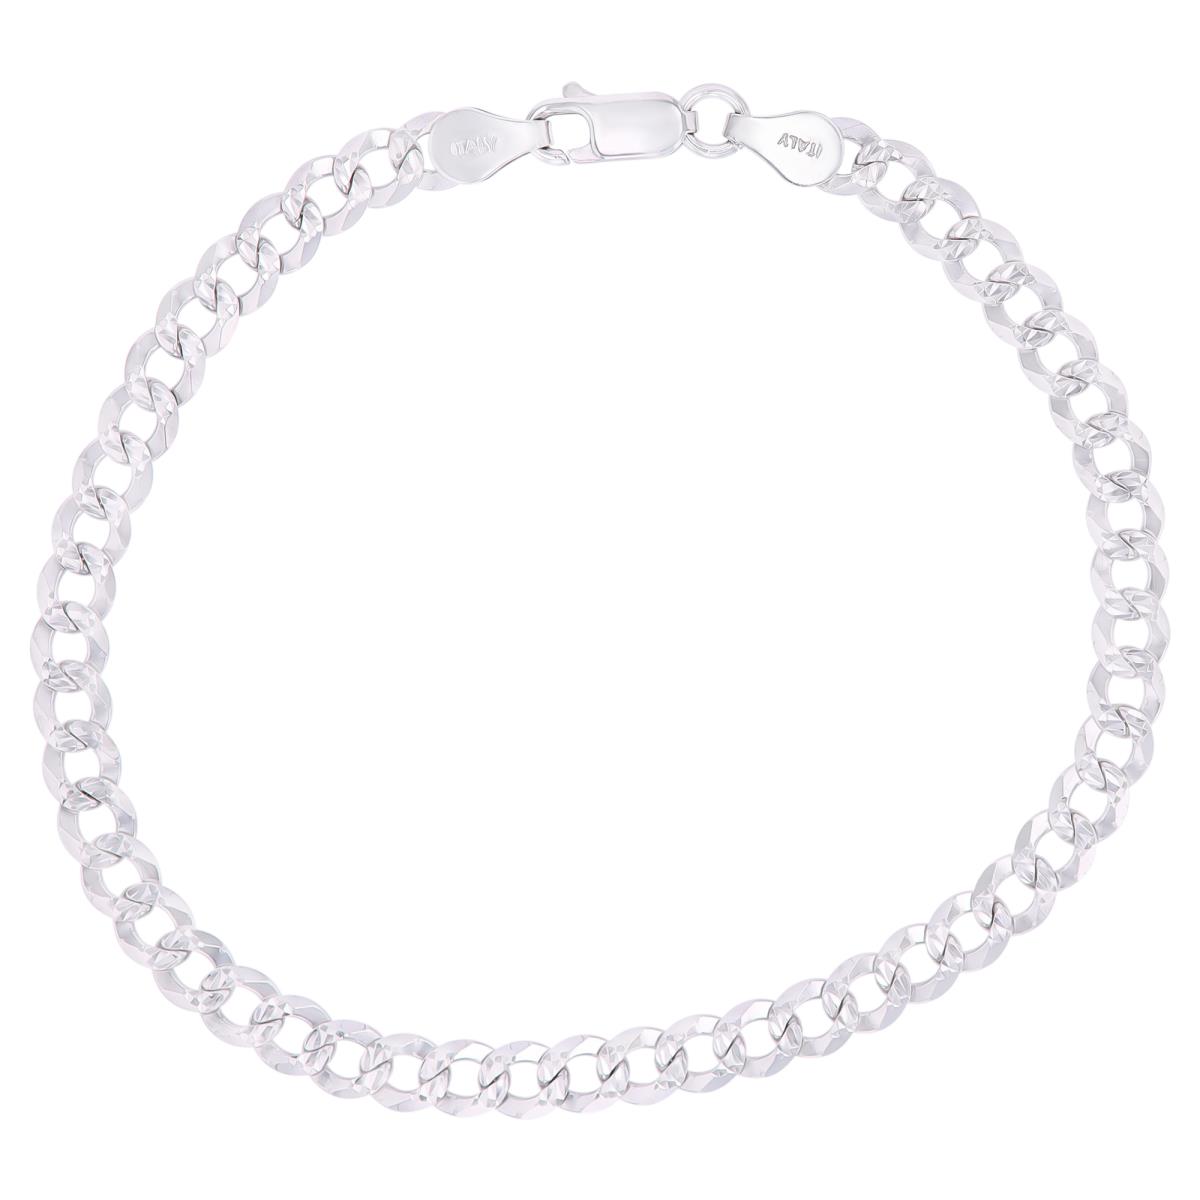 Sterling Silver Rhodium DC 5mm 150 Curb Pave 8.25"Chain Bracelet